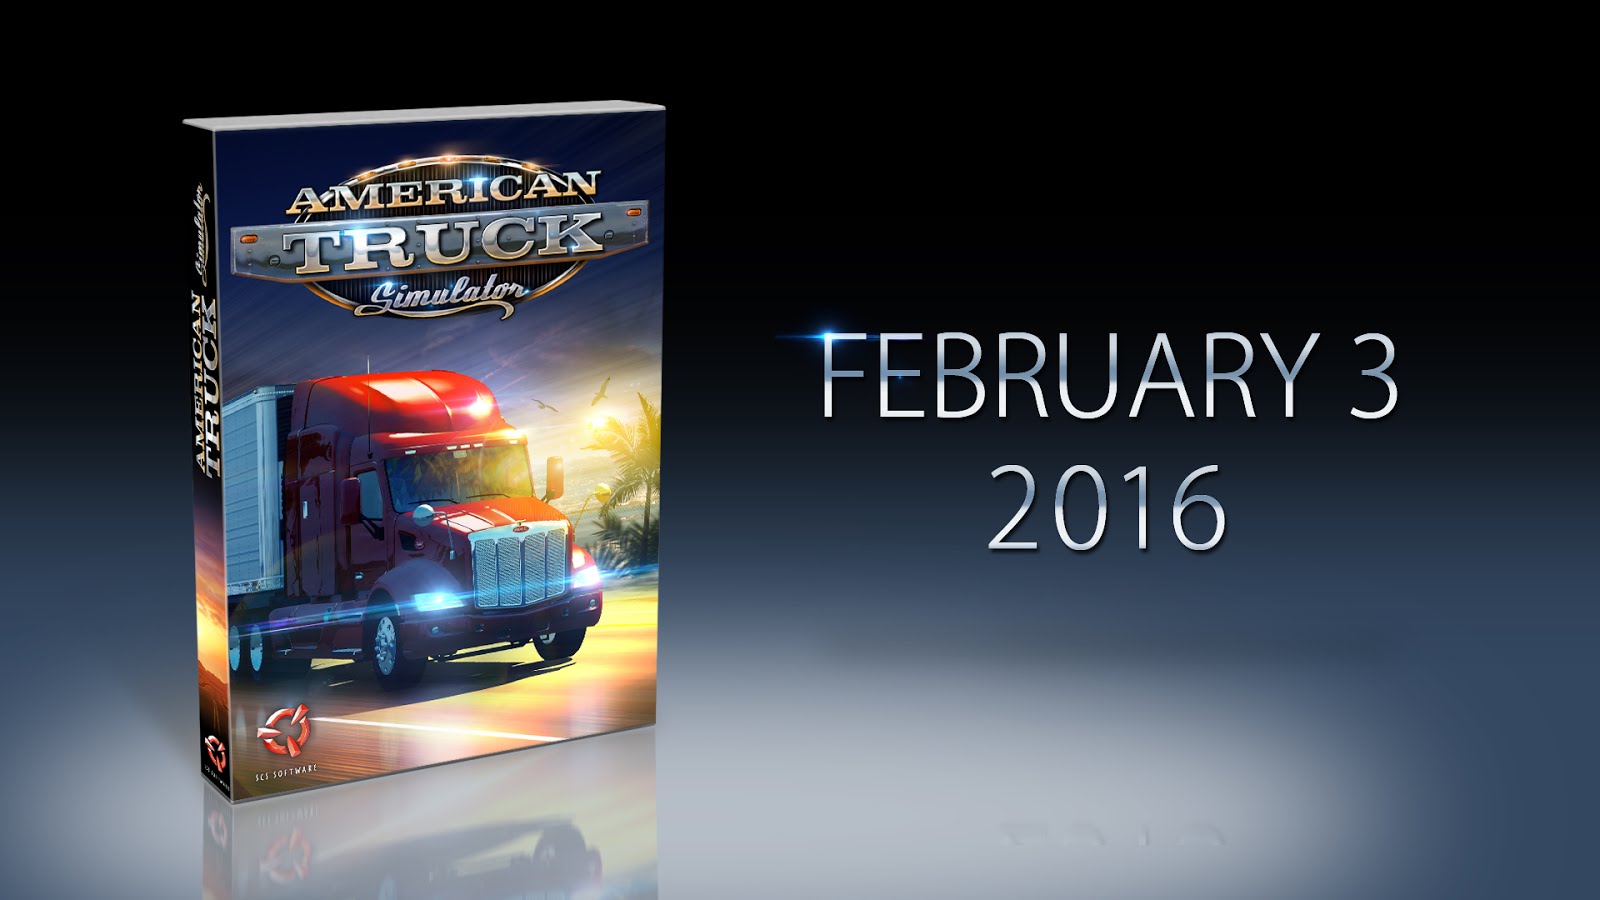 Finally American Truck Simulator Release Date has been revealed